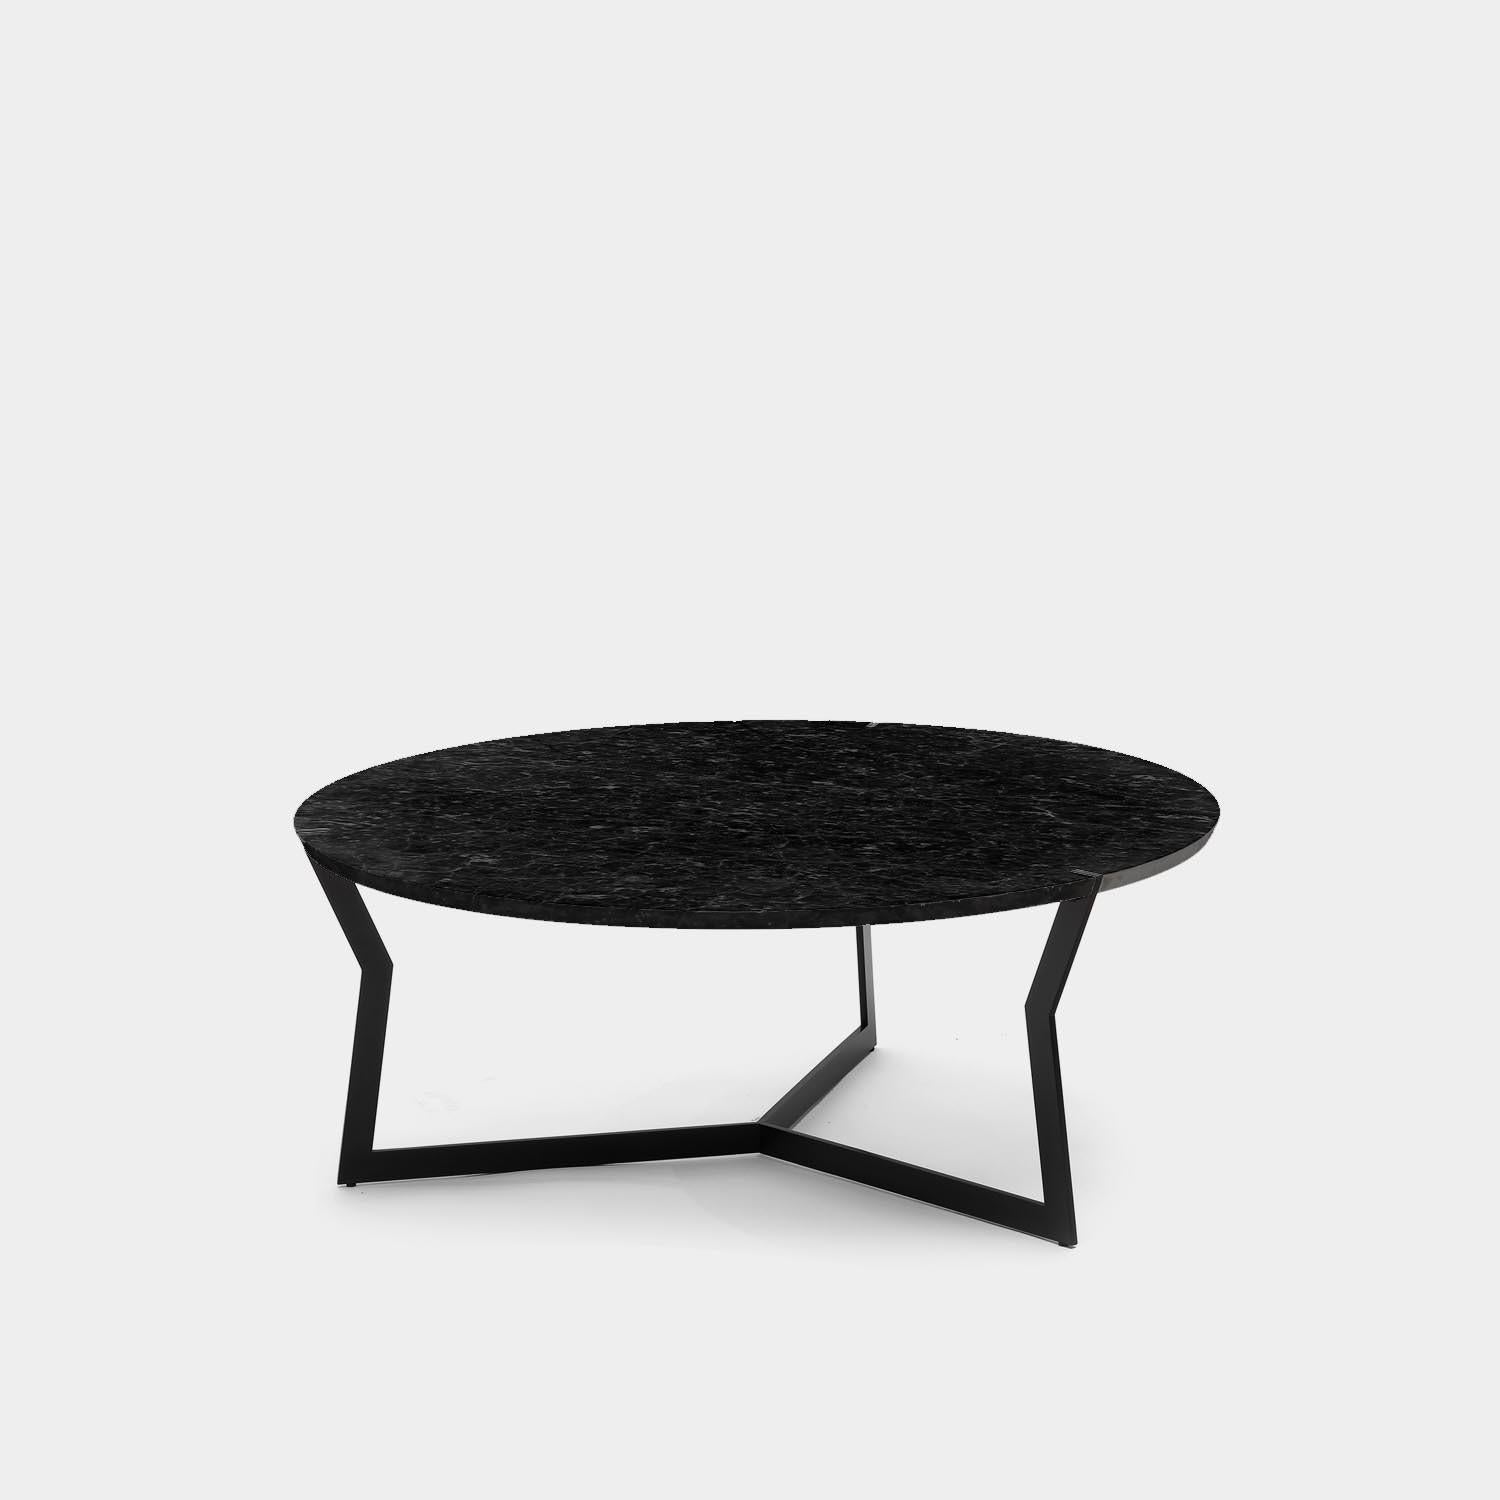 Round Nero Marquina star coffee table by Olivier Gagnère
Materials: Carrara marble or black Marquina marble top. Gold lacquered metal base.
Technique: lacquered metal, polished marble. 
Dimensions: diameter 90 x height 35 cm
Also available in